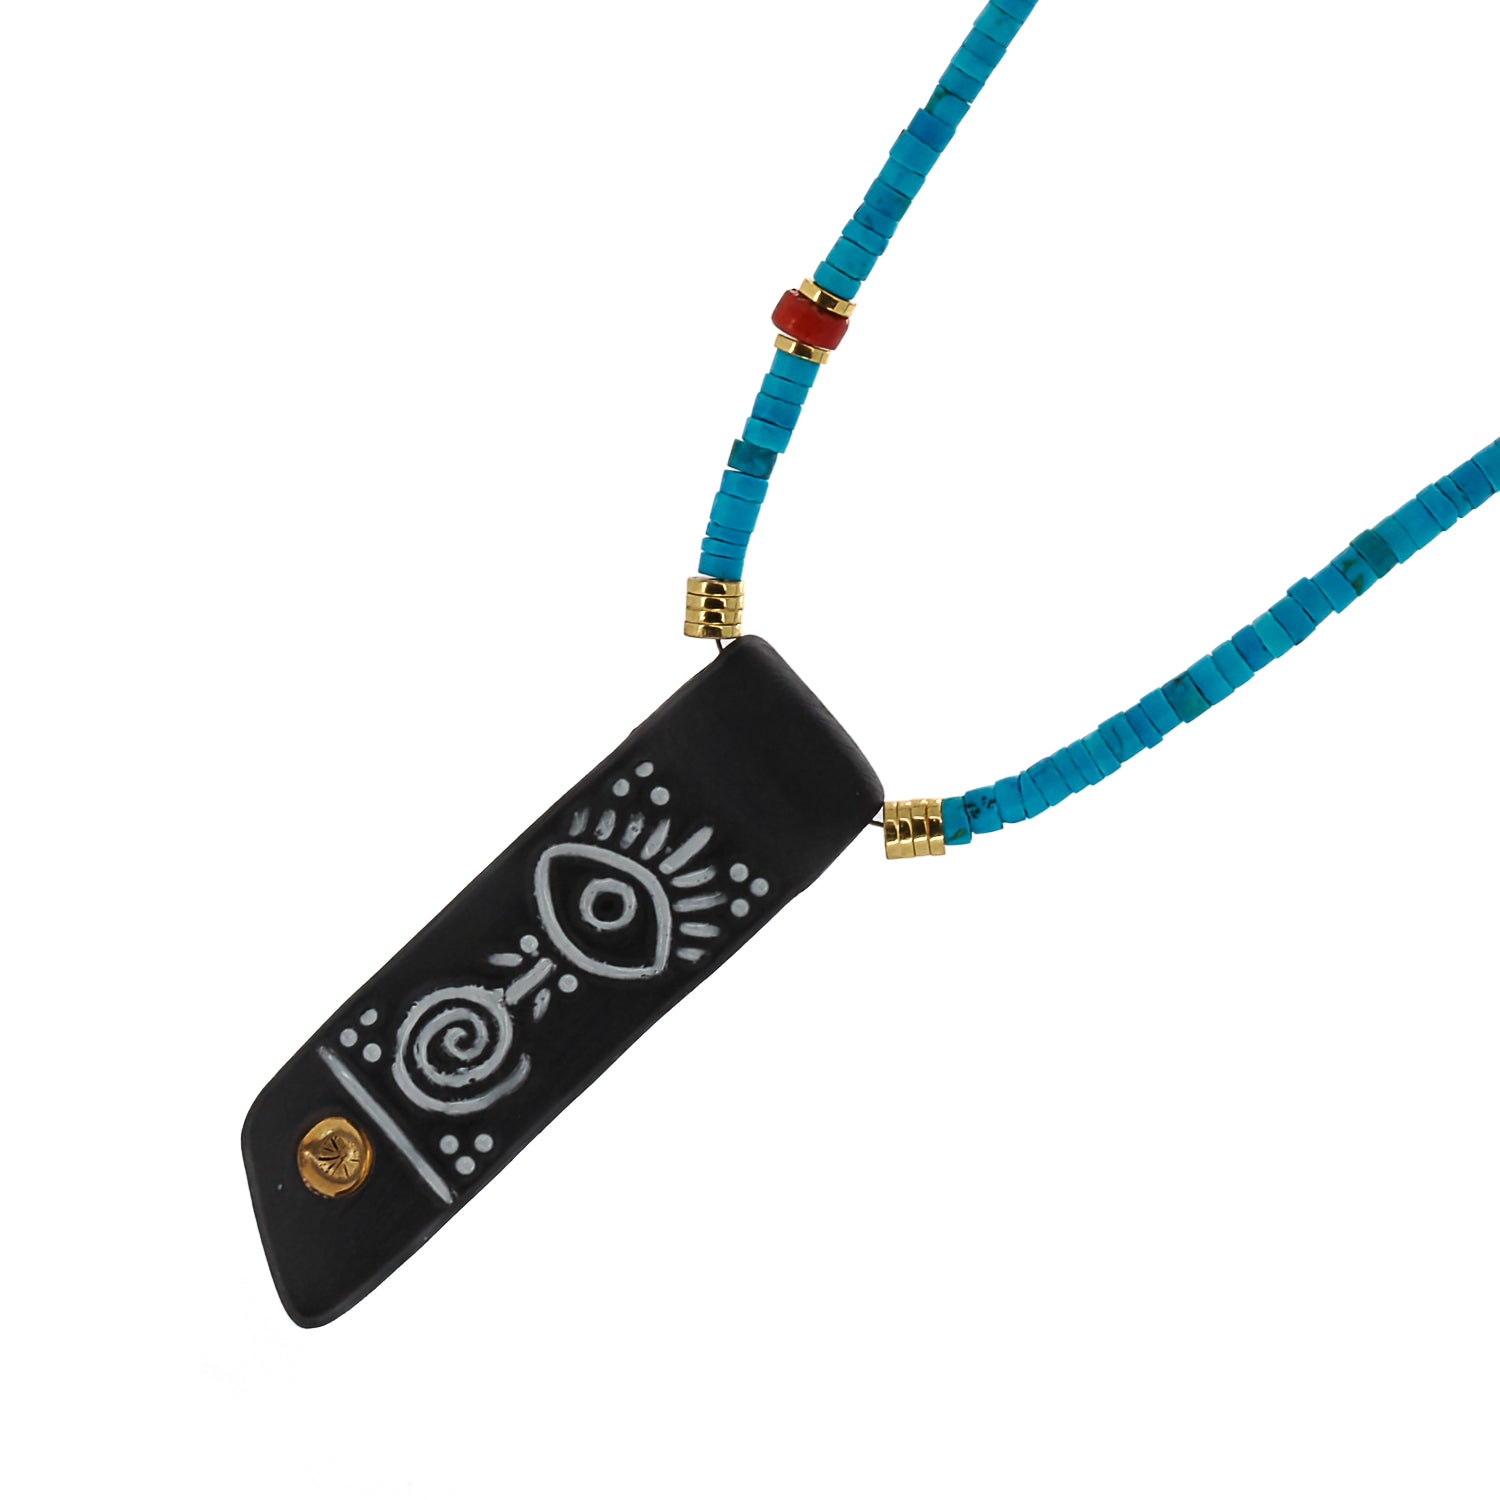 Turquoise Gemstone - Radiating Natural Elegance. The necklace features a turquoise gemstone, renowned for its striking natural beauty, symbolizing tranquility, protection, and wisdom.